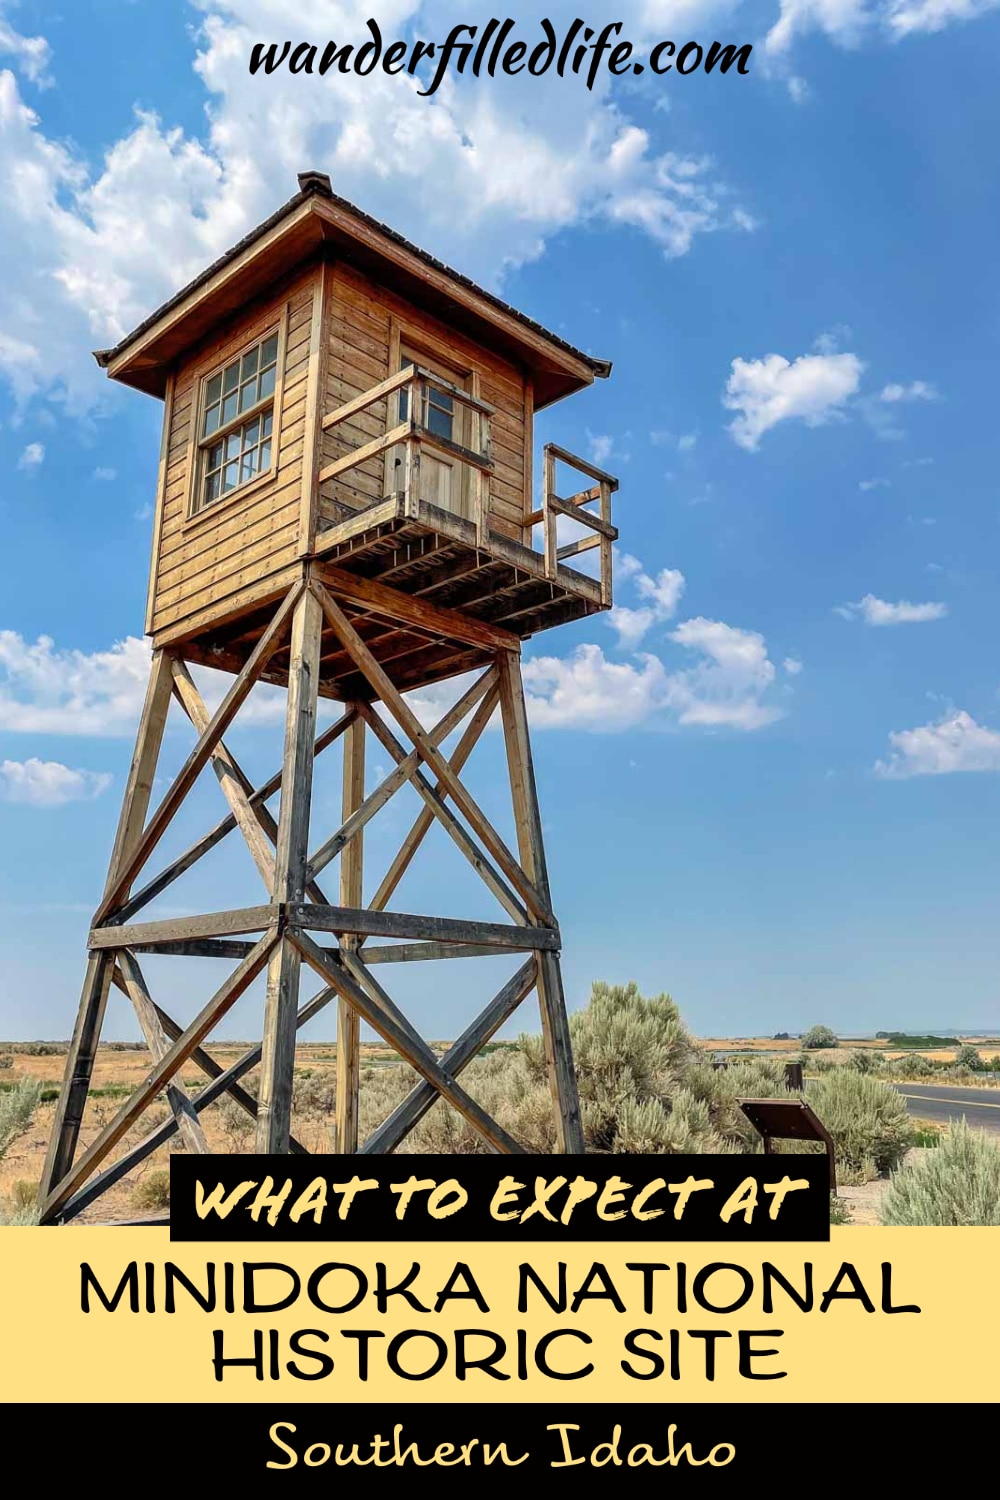 Minidoka National Historic Site tells the heartbreaking story of Japanese American citizens incarcerated for years during World War II.